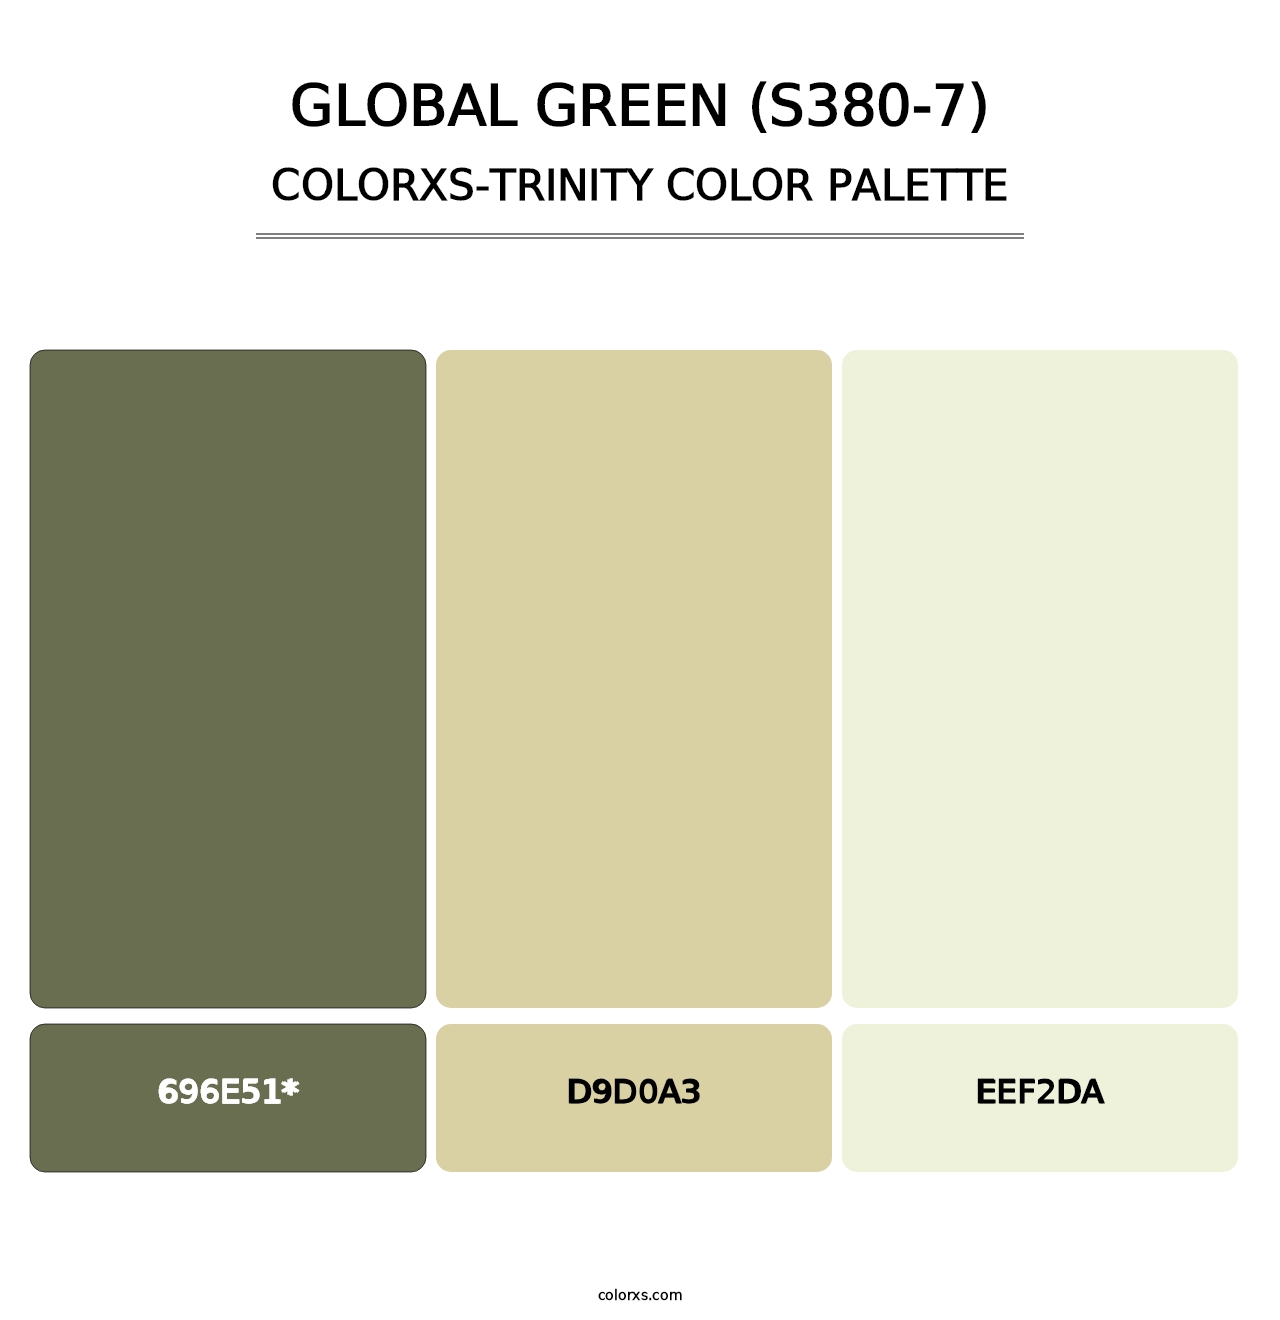 Global Green (S380-7) - Colorxs Trinity Palette